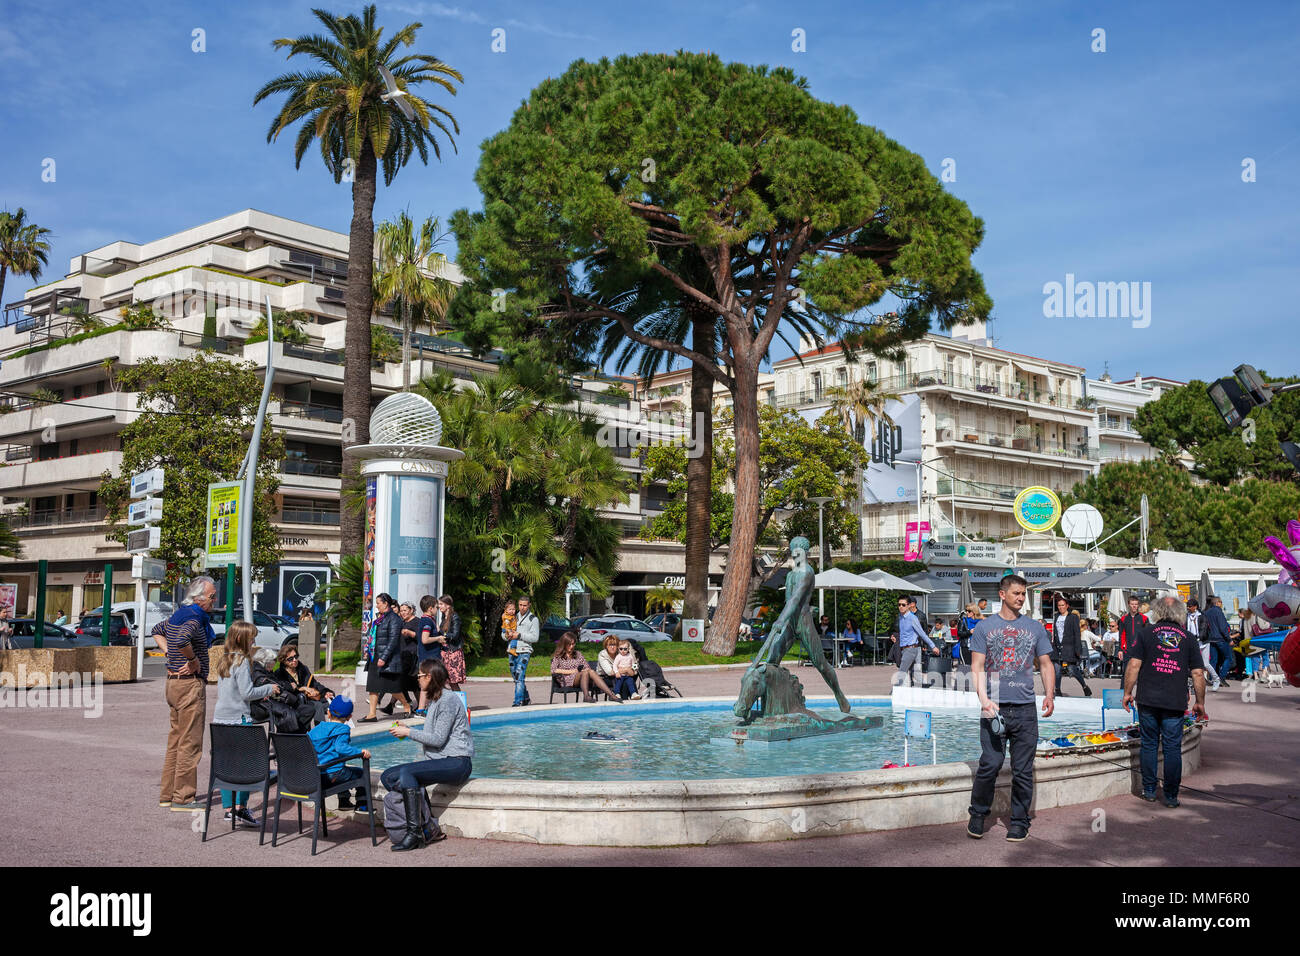 France, Cannes city, people at Square Reynaldo Hahn with fountain on Boulevard de la Croisette Stock Photo